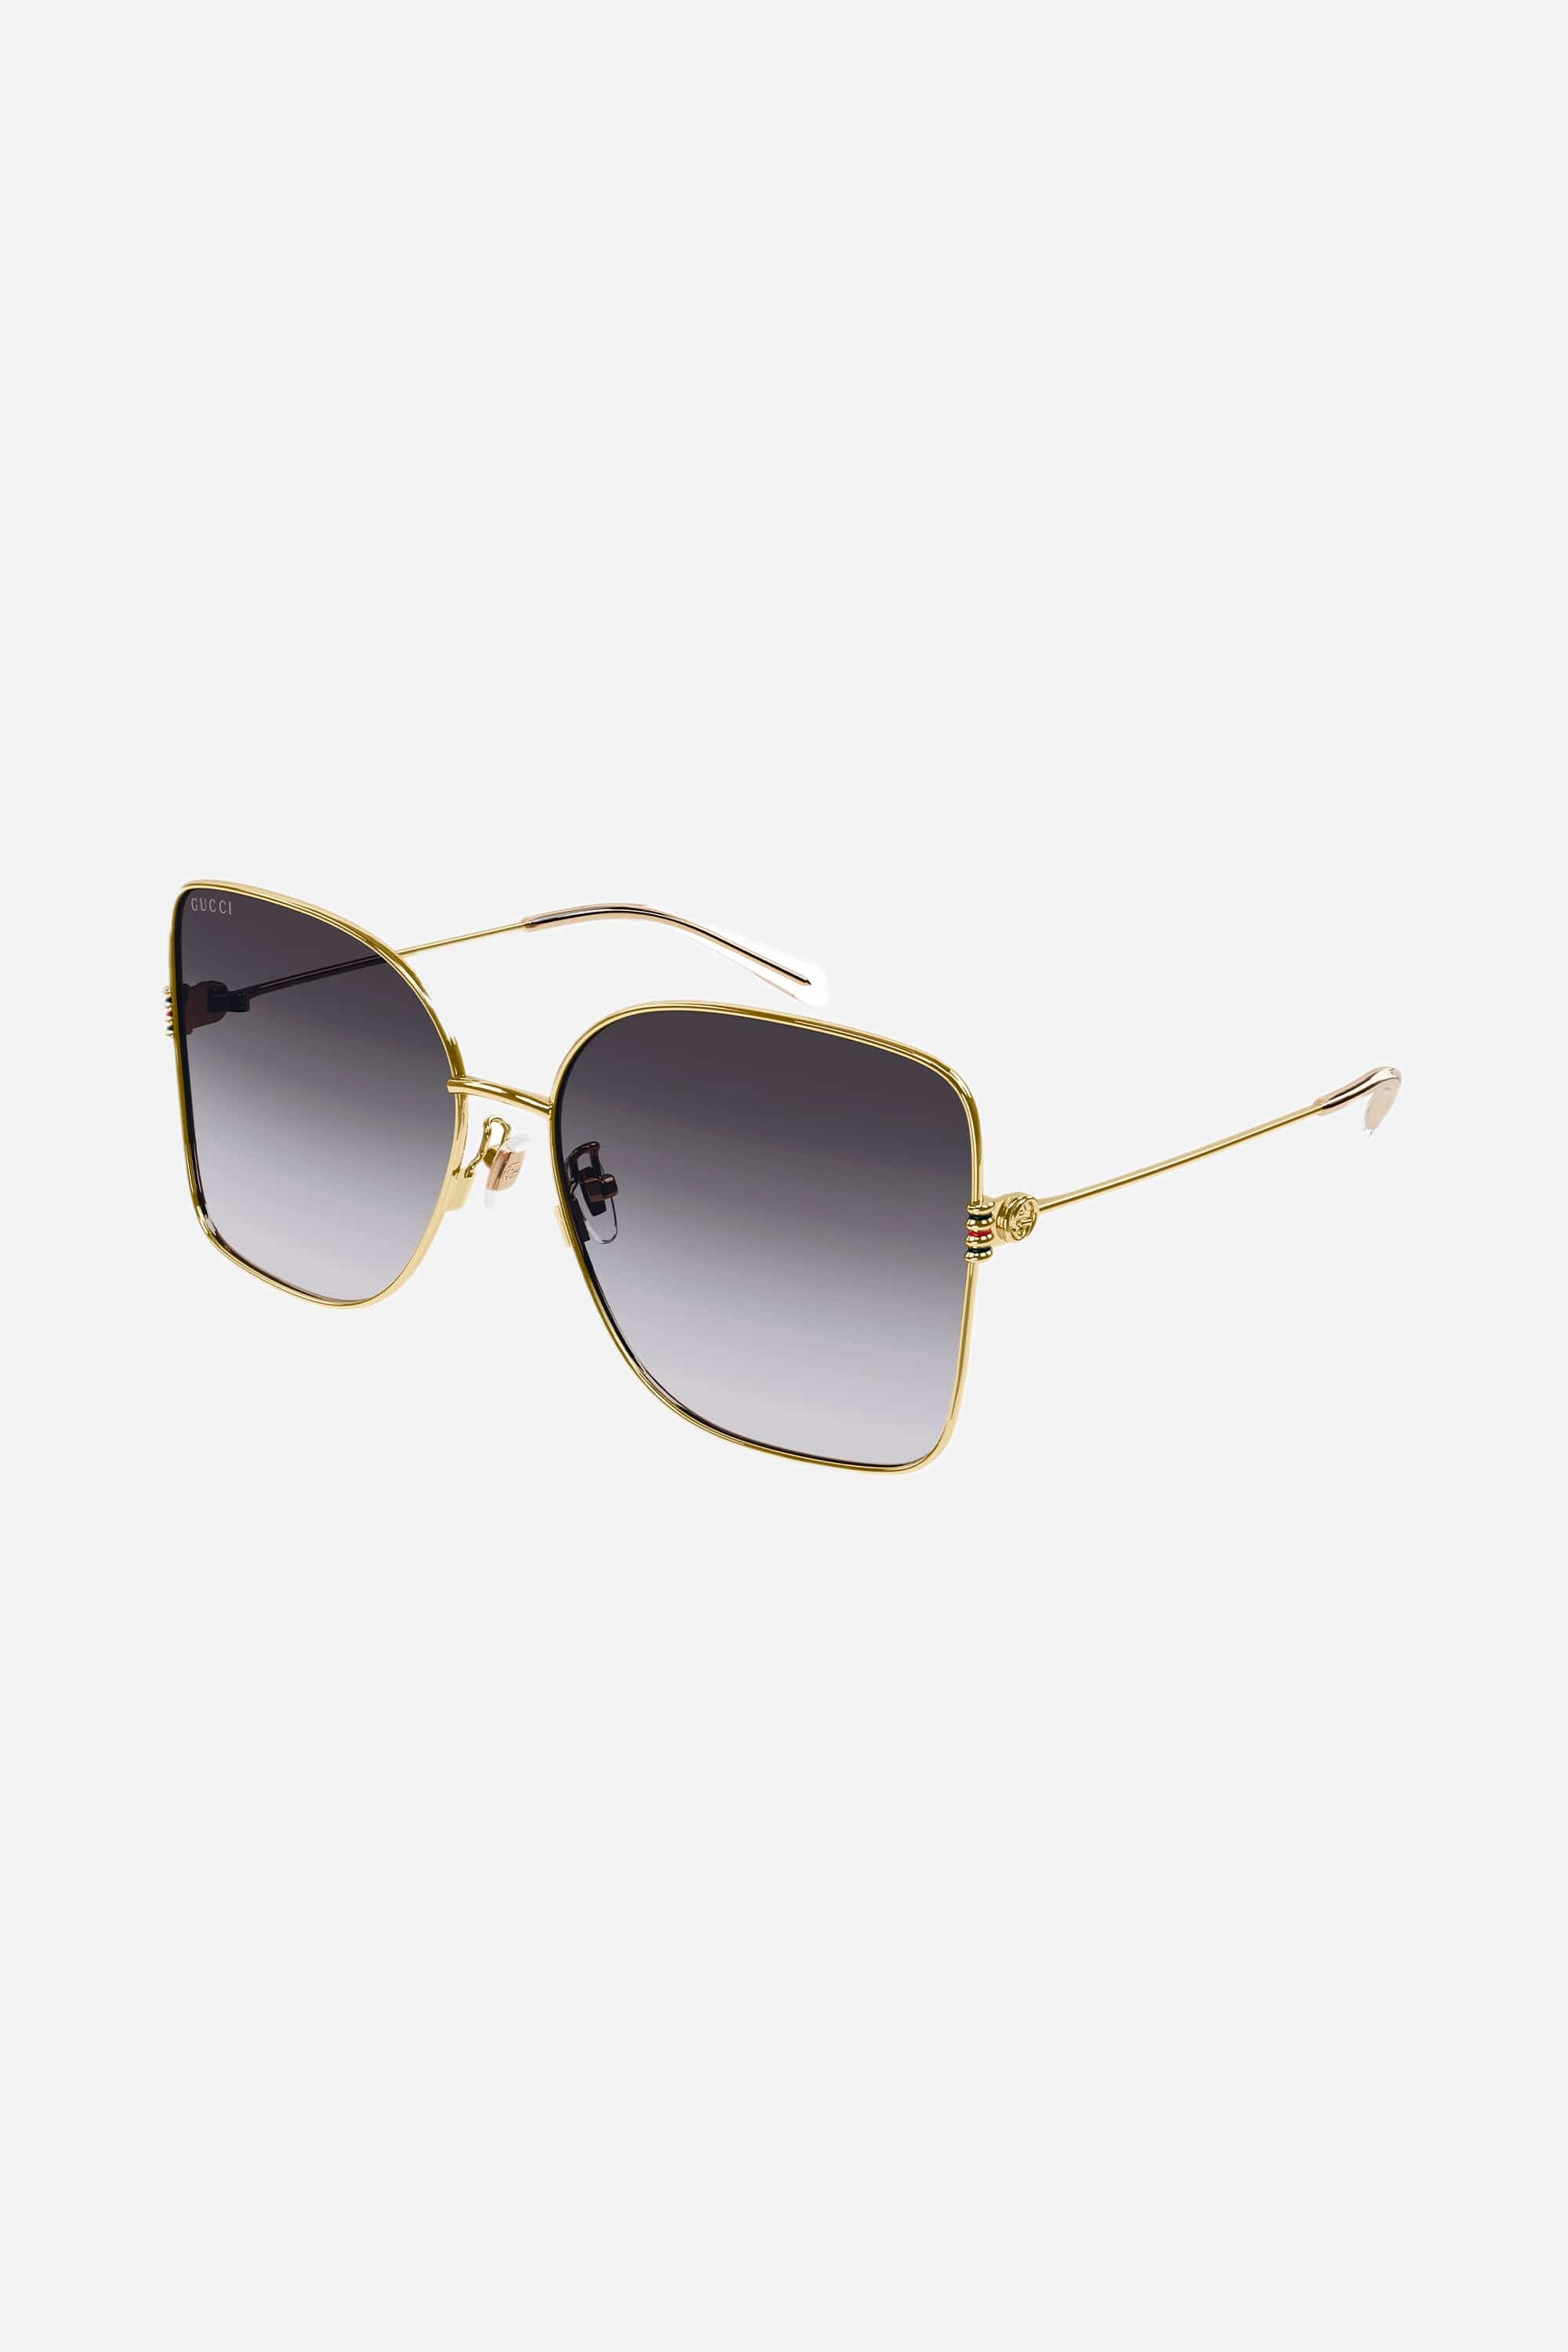 Gucci metal squared sunglasses with colored enamel - Eyewear Club